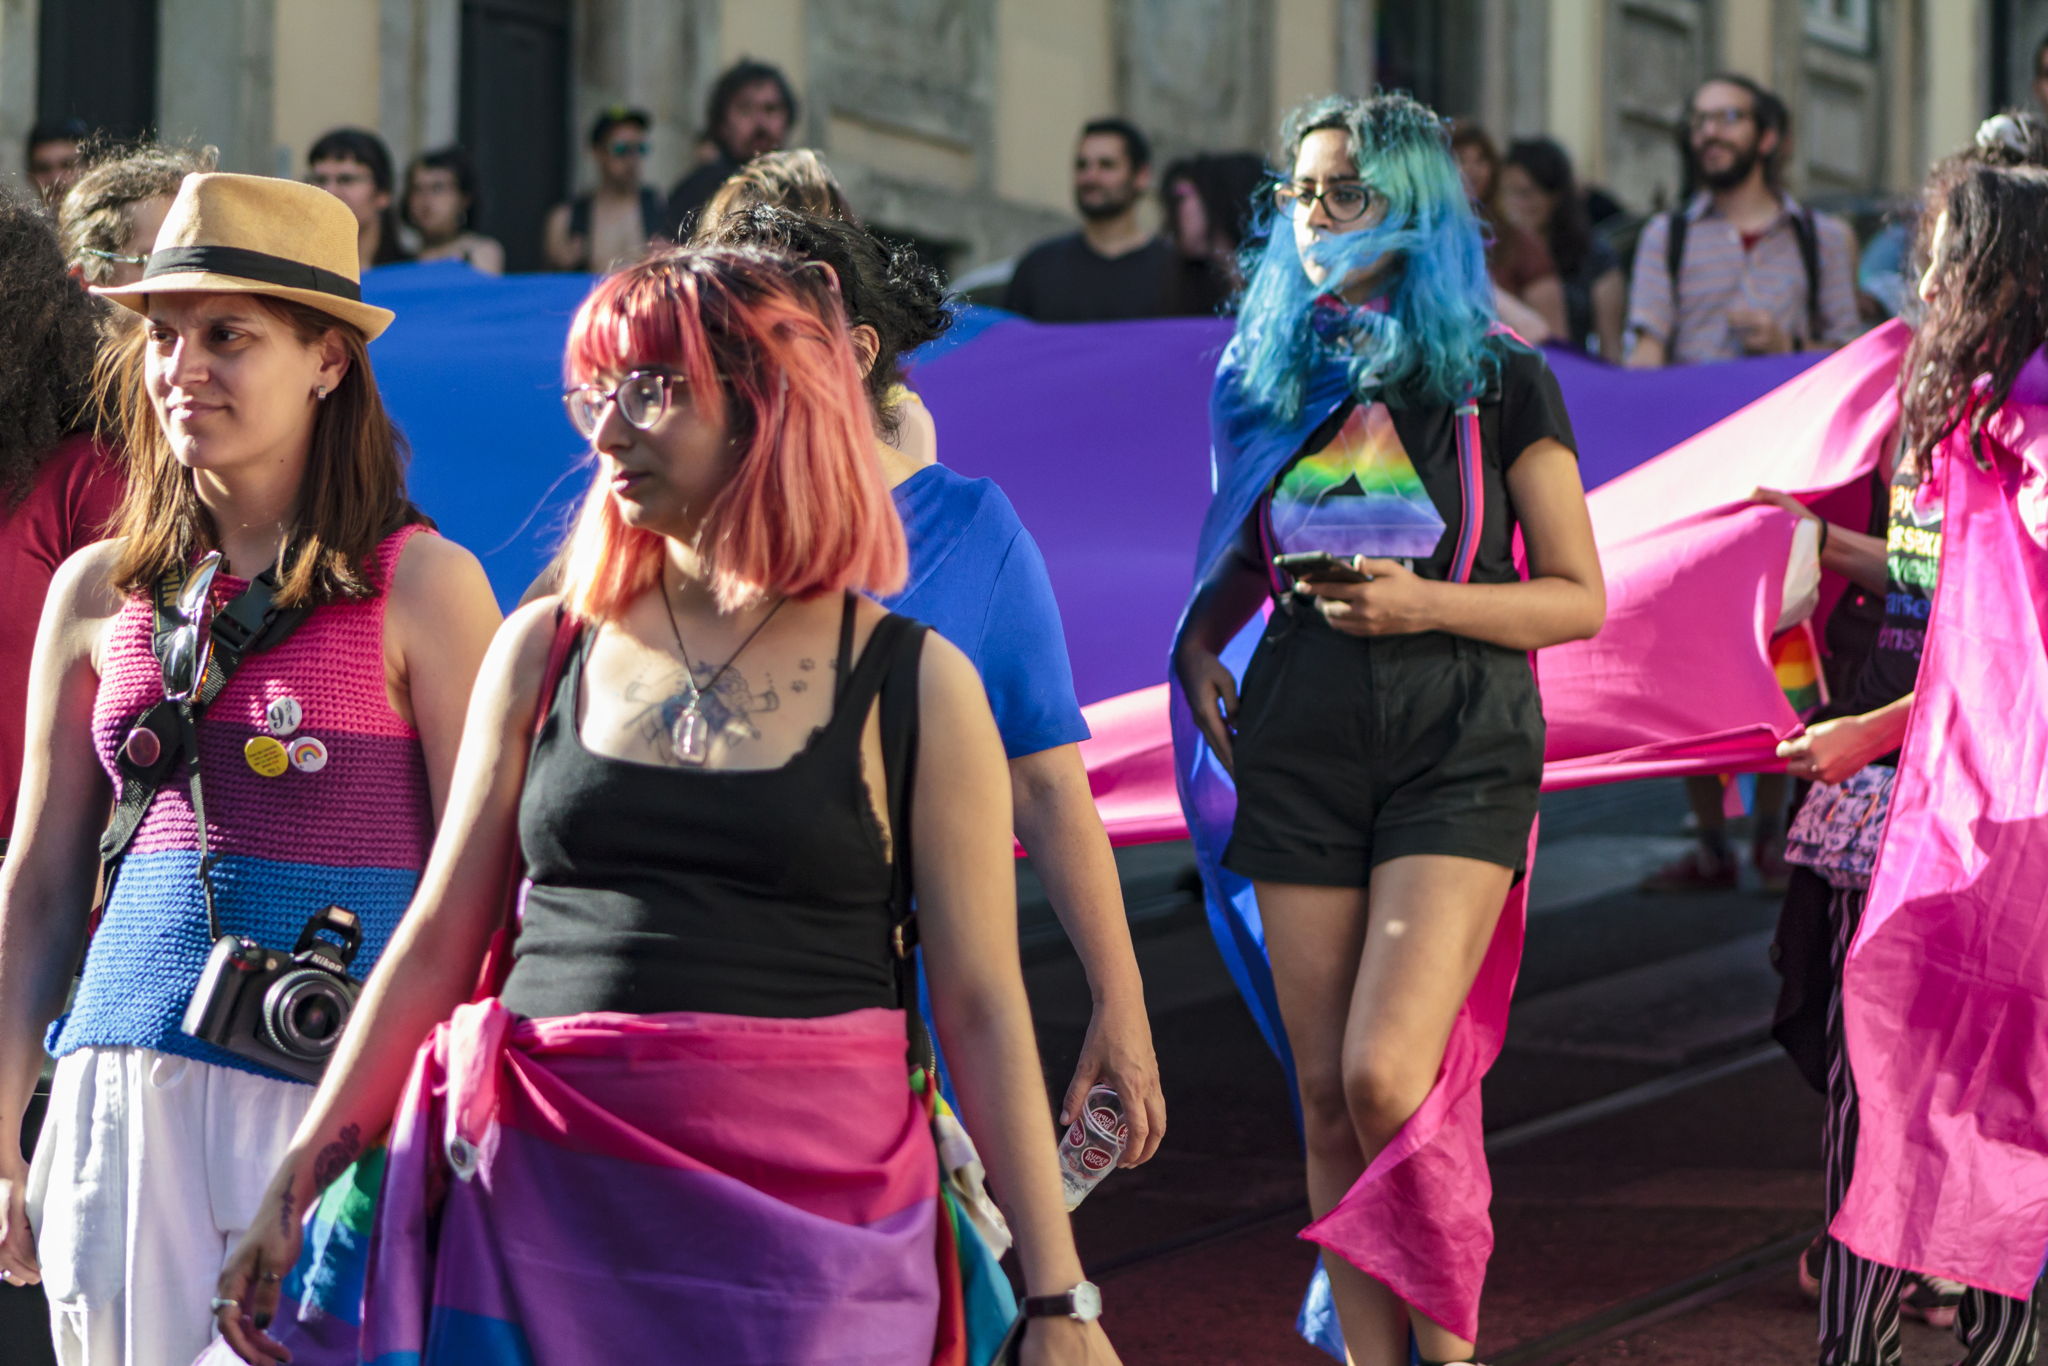 Several women with different colored hair, marching together wearing the bi flag on their bodies.